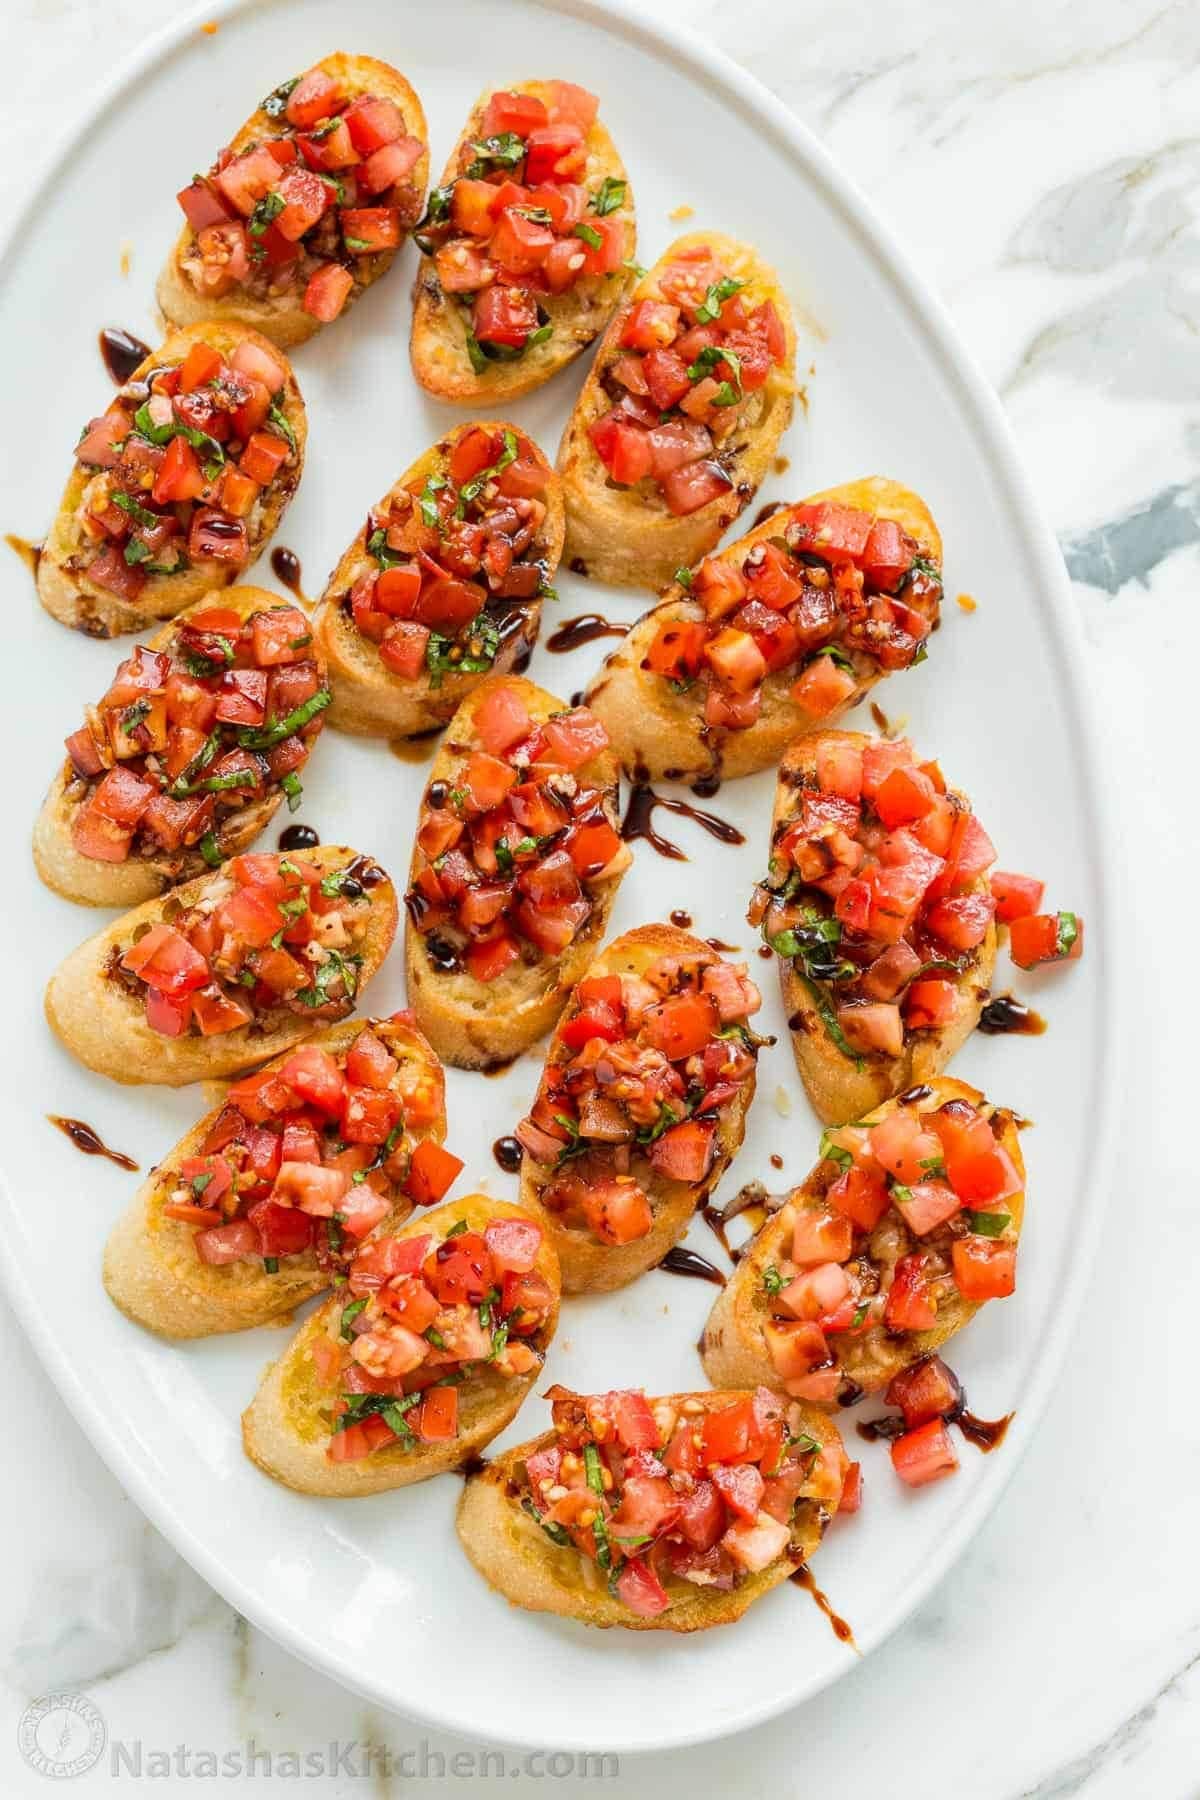 Sliced crostini topped with tomato and herbs drizzled with balsamic vinegar